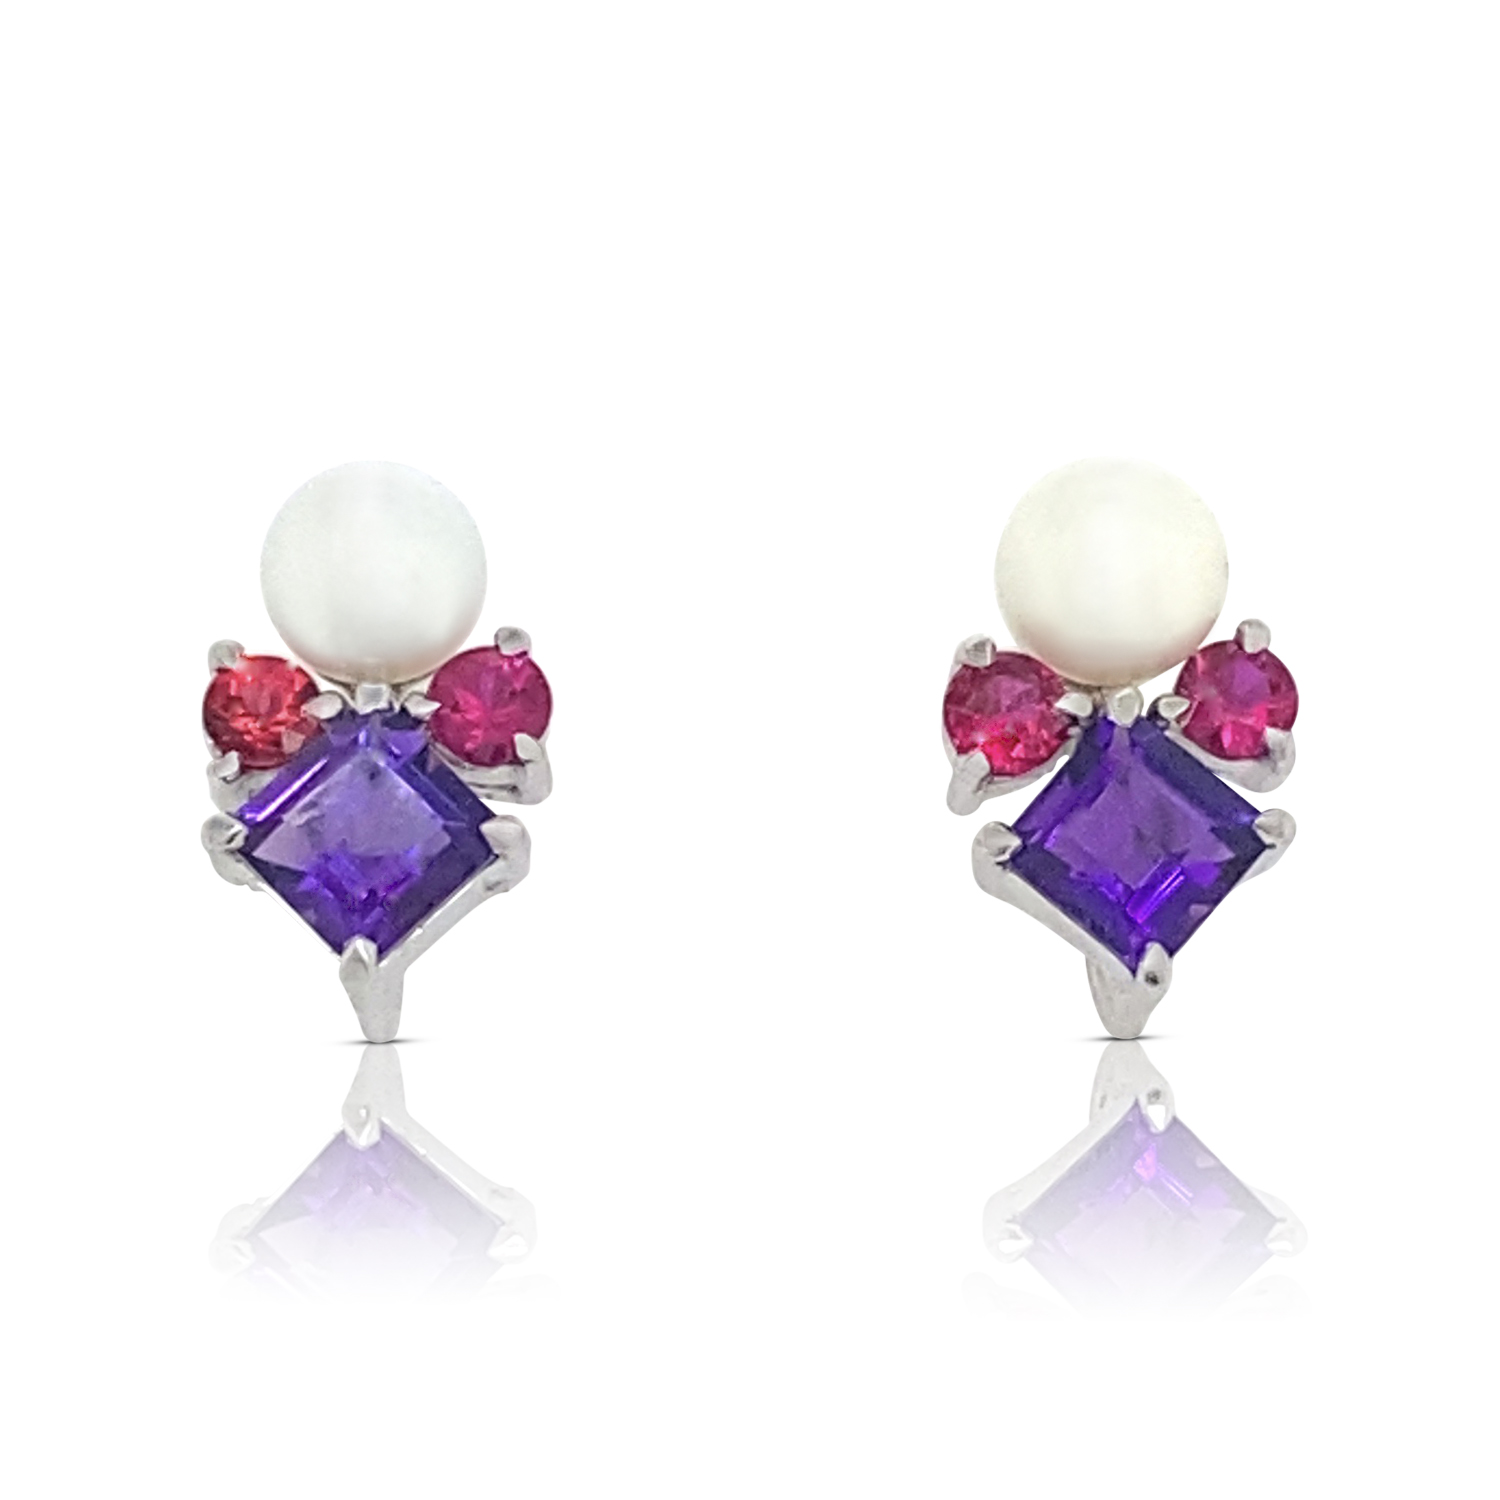 Seraphim earrings with Amethyst, Ruby and Pearl